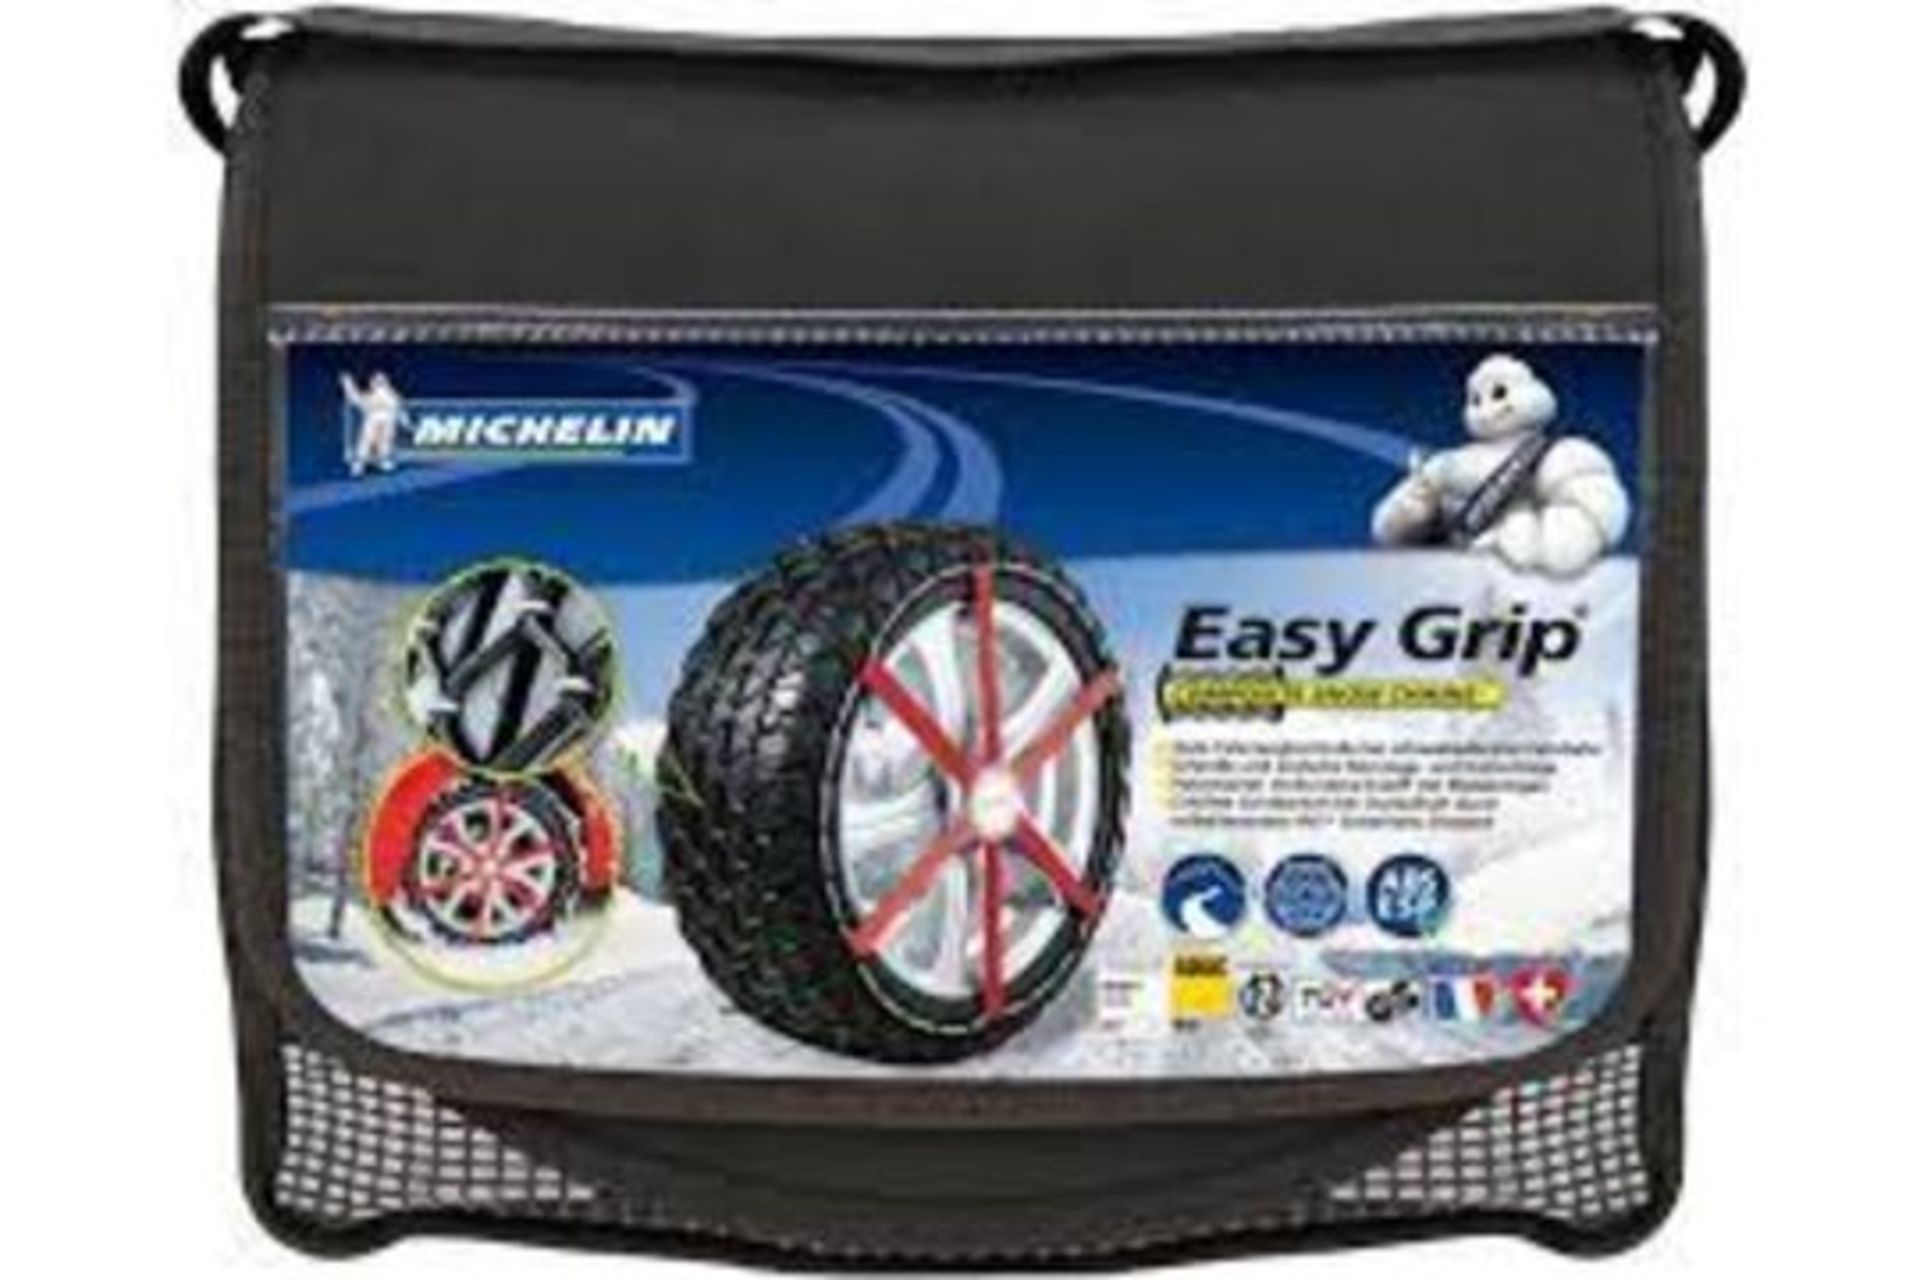 10 X NEW PACKAGED SETS OF Michelin 92302 Textile snow chains Easy Grip J11, ABS and ESP